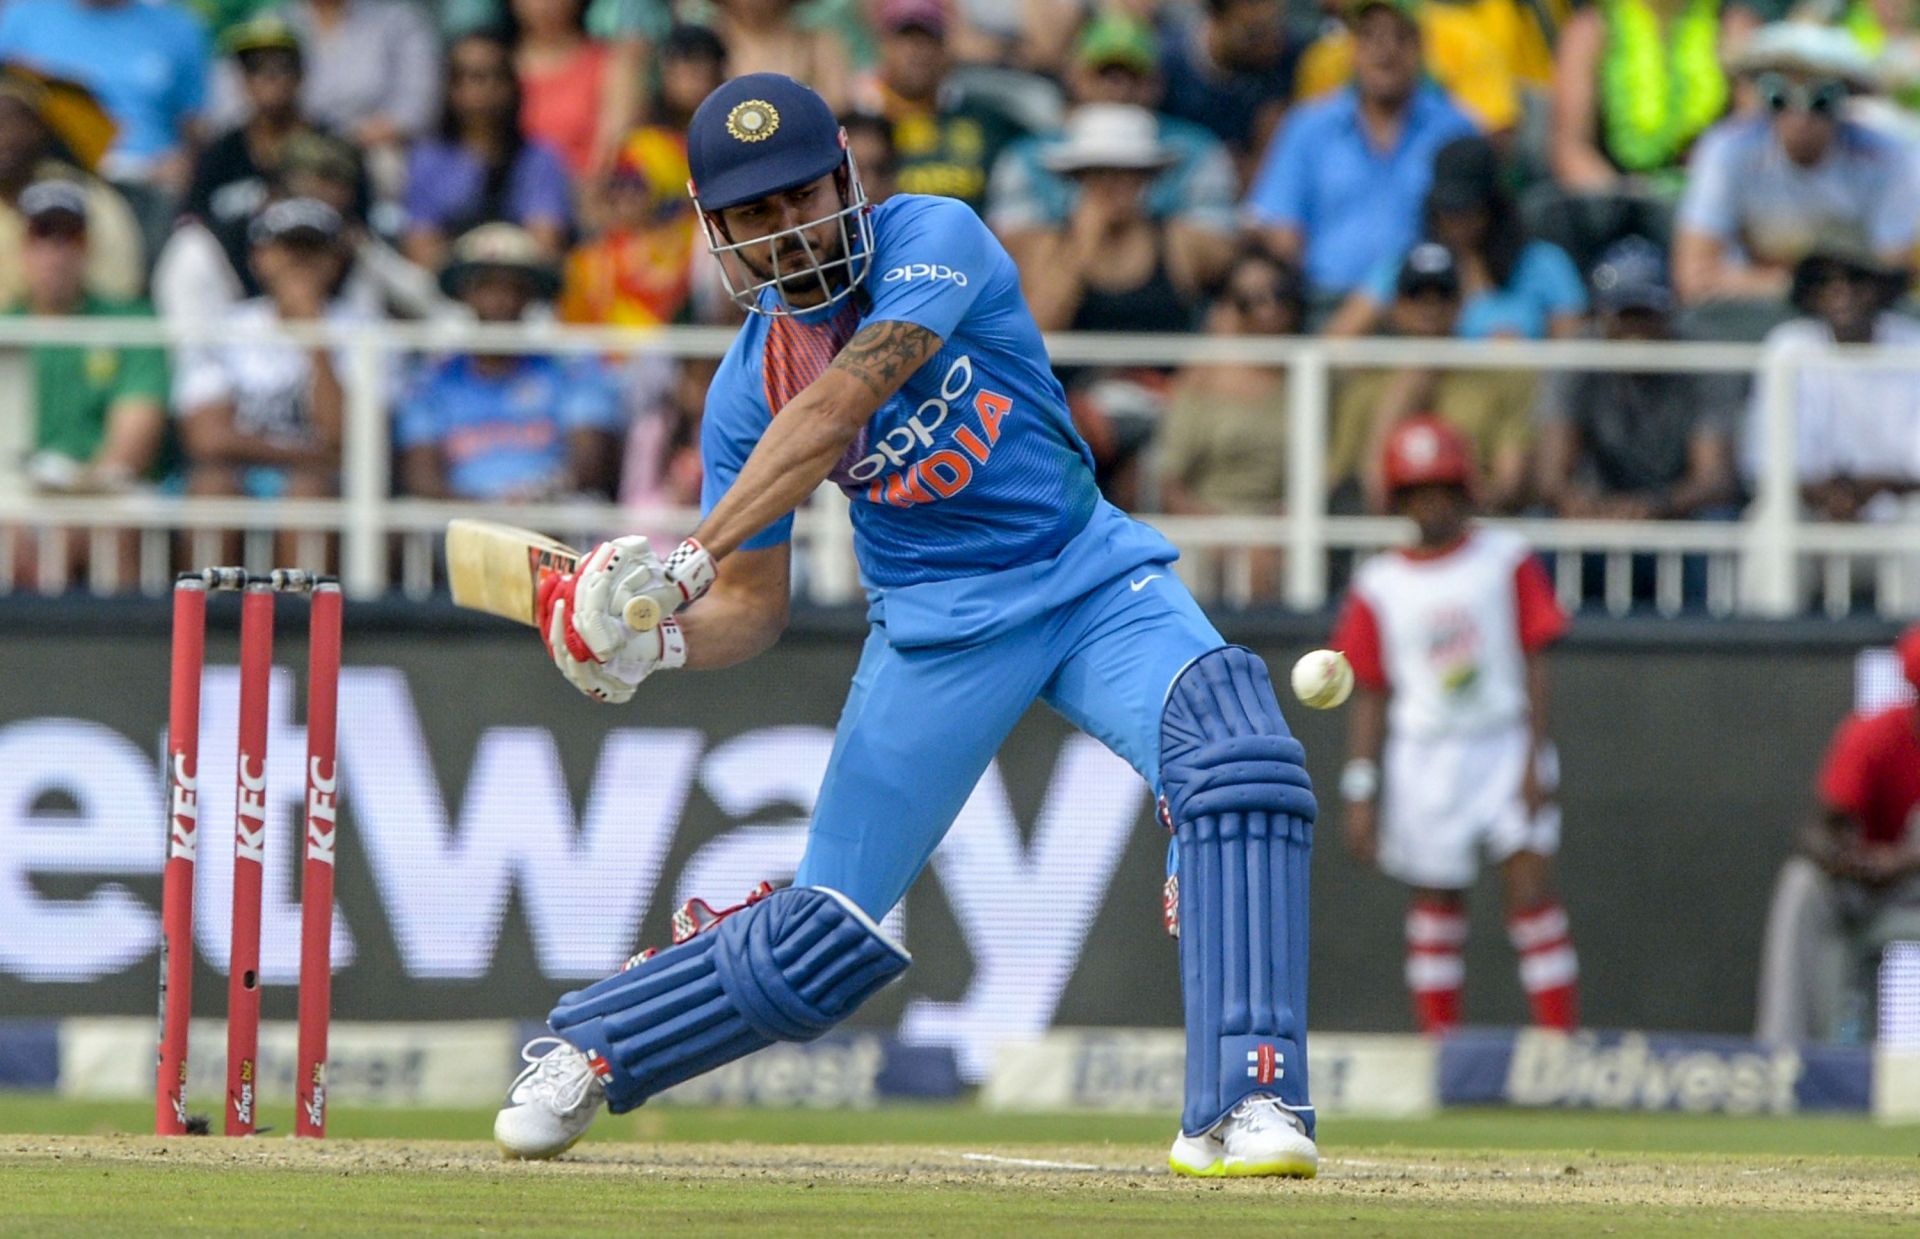 Manish Pandey did not play a single game in the ODI series